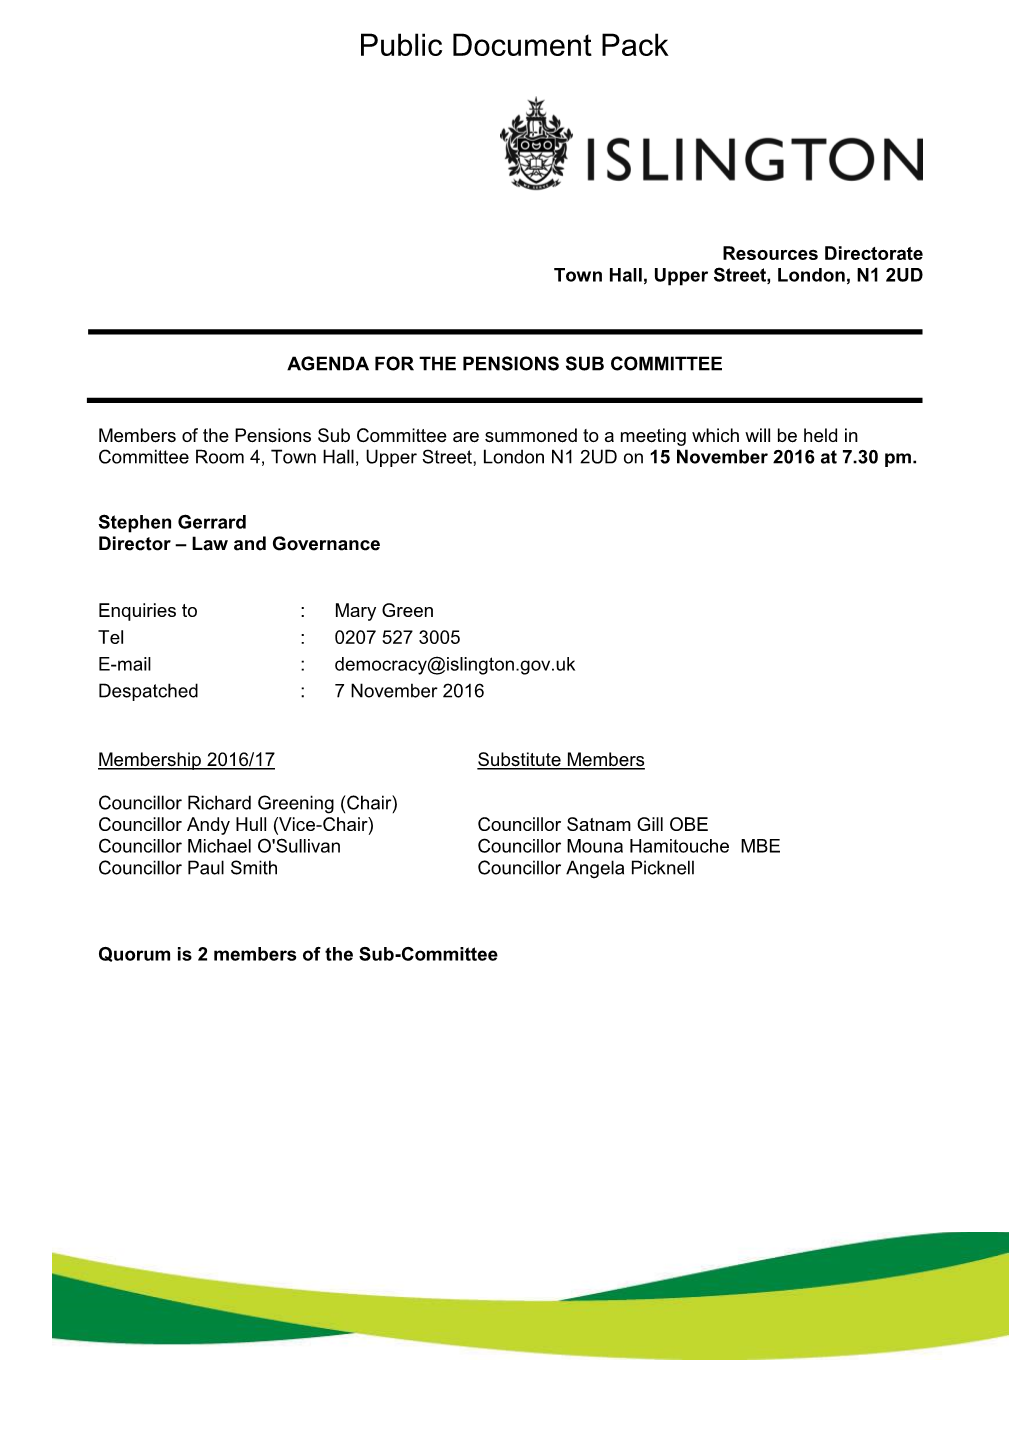 (Public Pack)Agenda Document for Pensions Sub Committee, 15/11